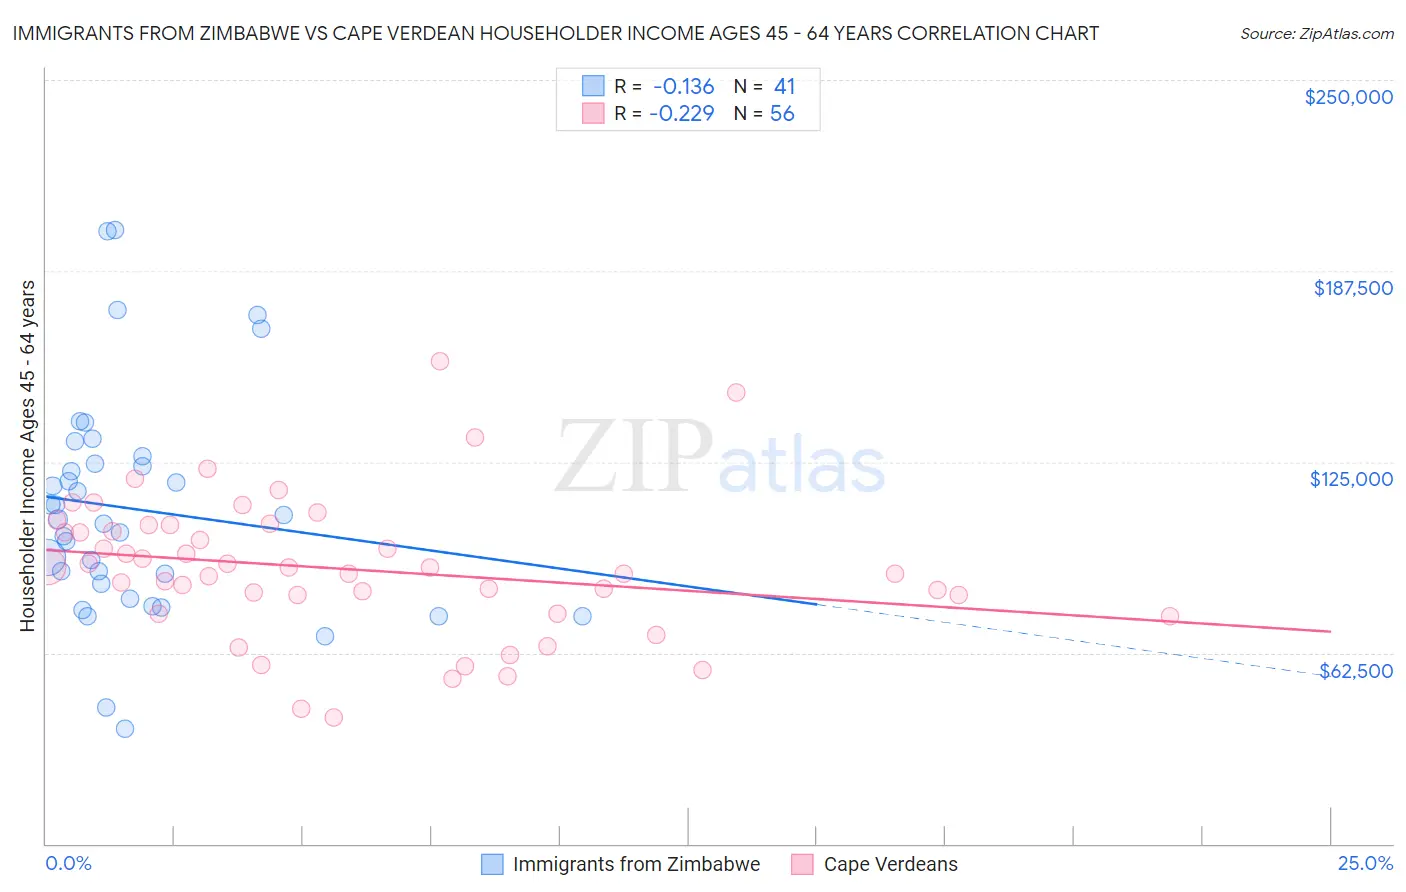 Immigrants from Zimbabwe vs Cape Verdean Householder Income Ages 45 - 64 years